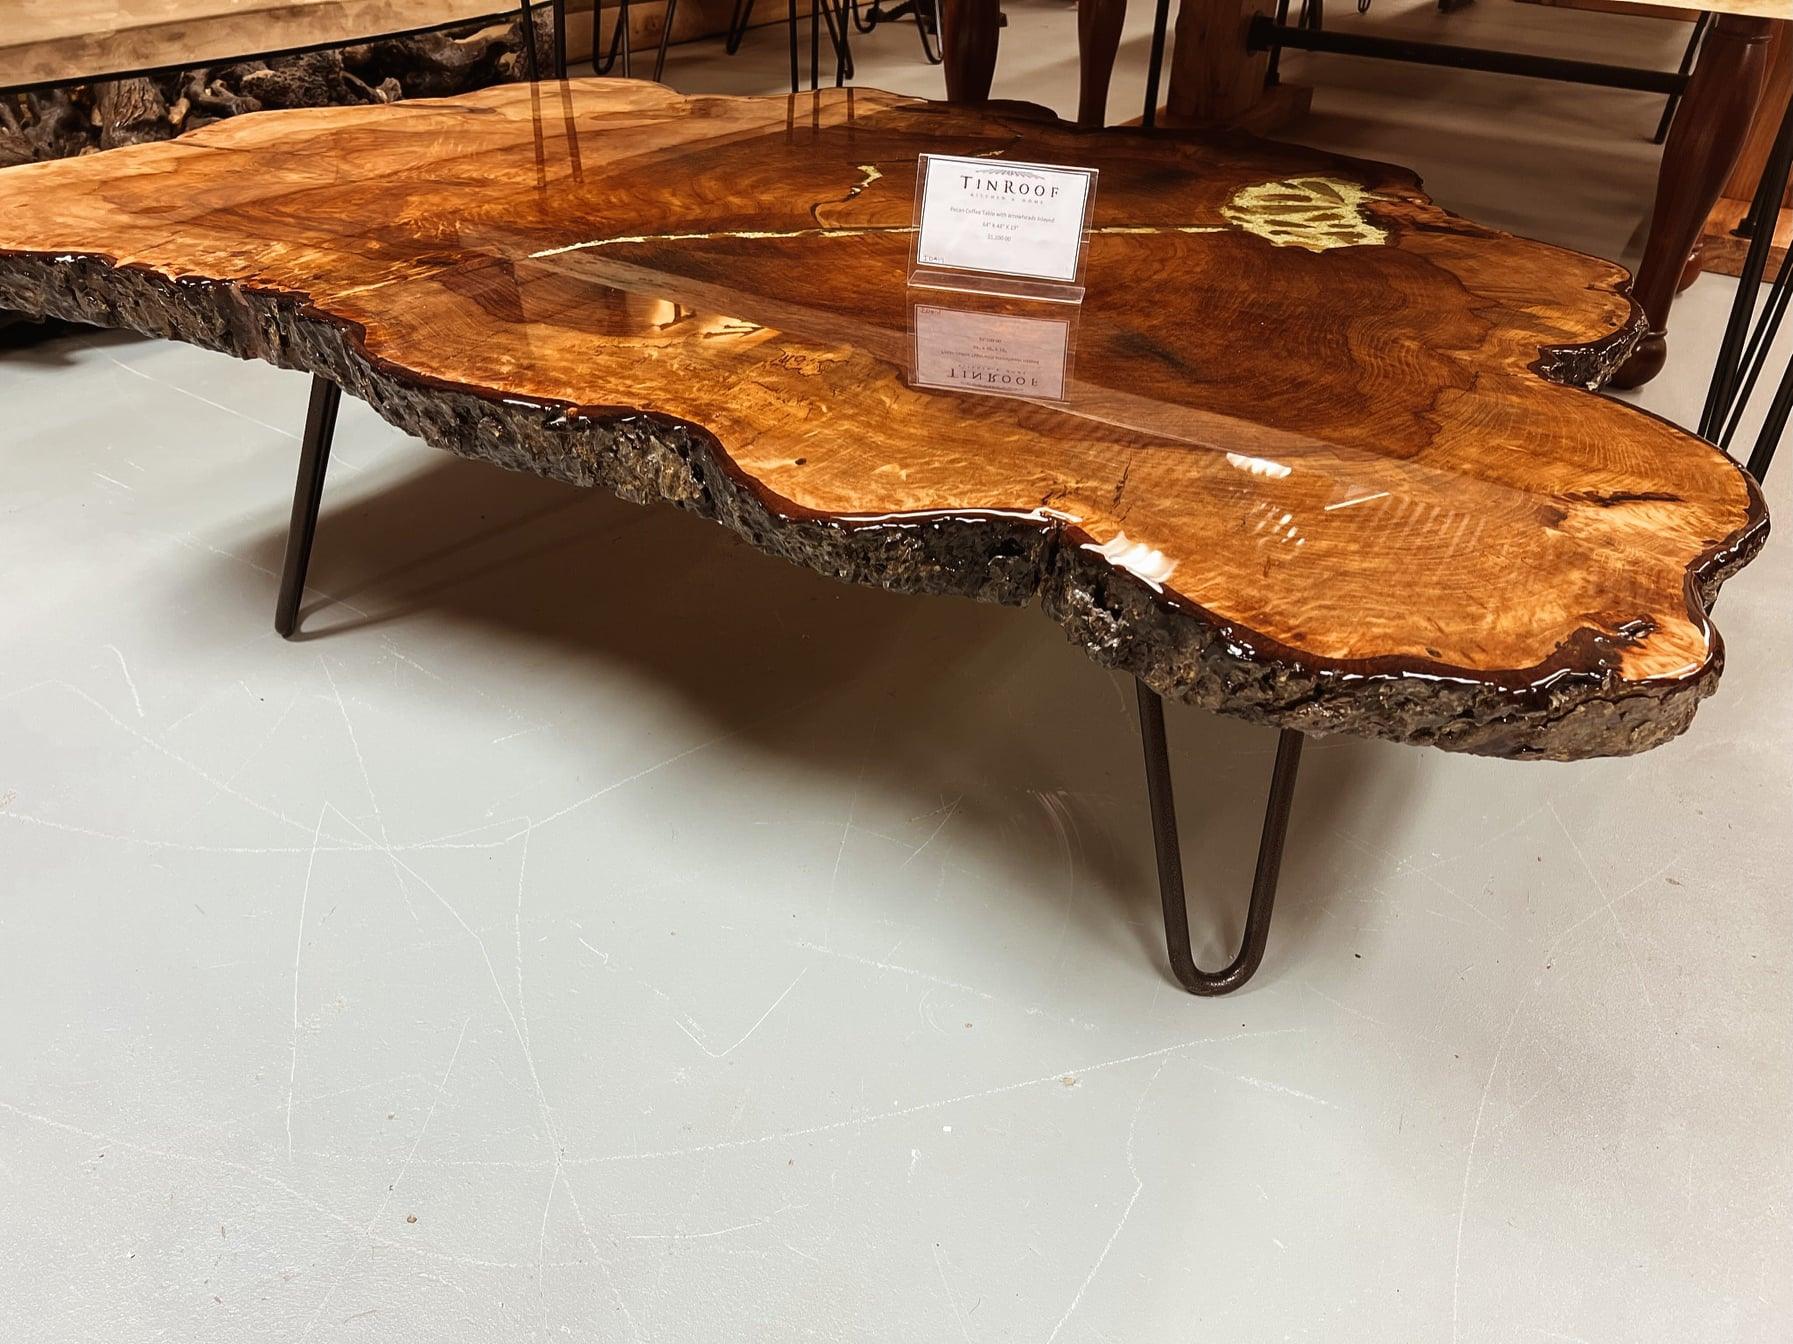 Pecan Coffee Table with Arrowheads - Tin Roof Kitchen & Home